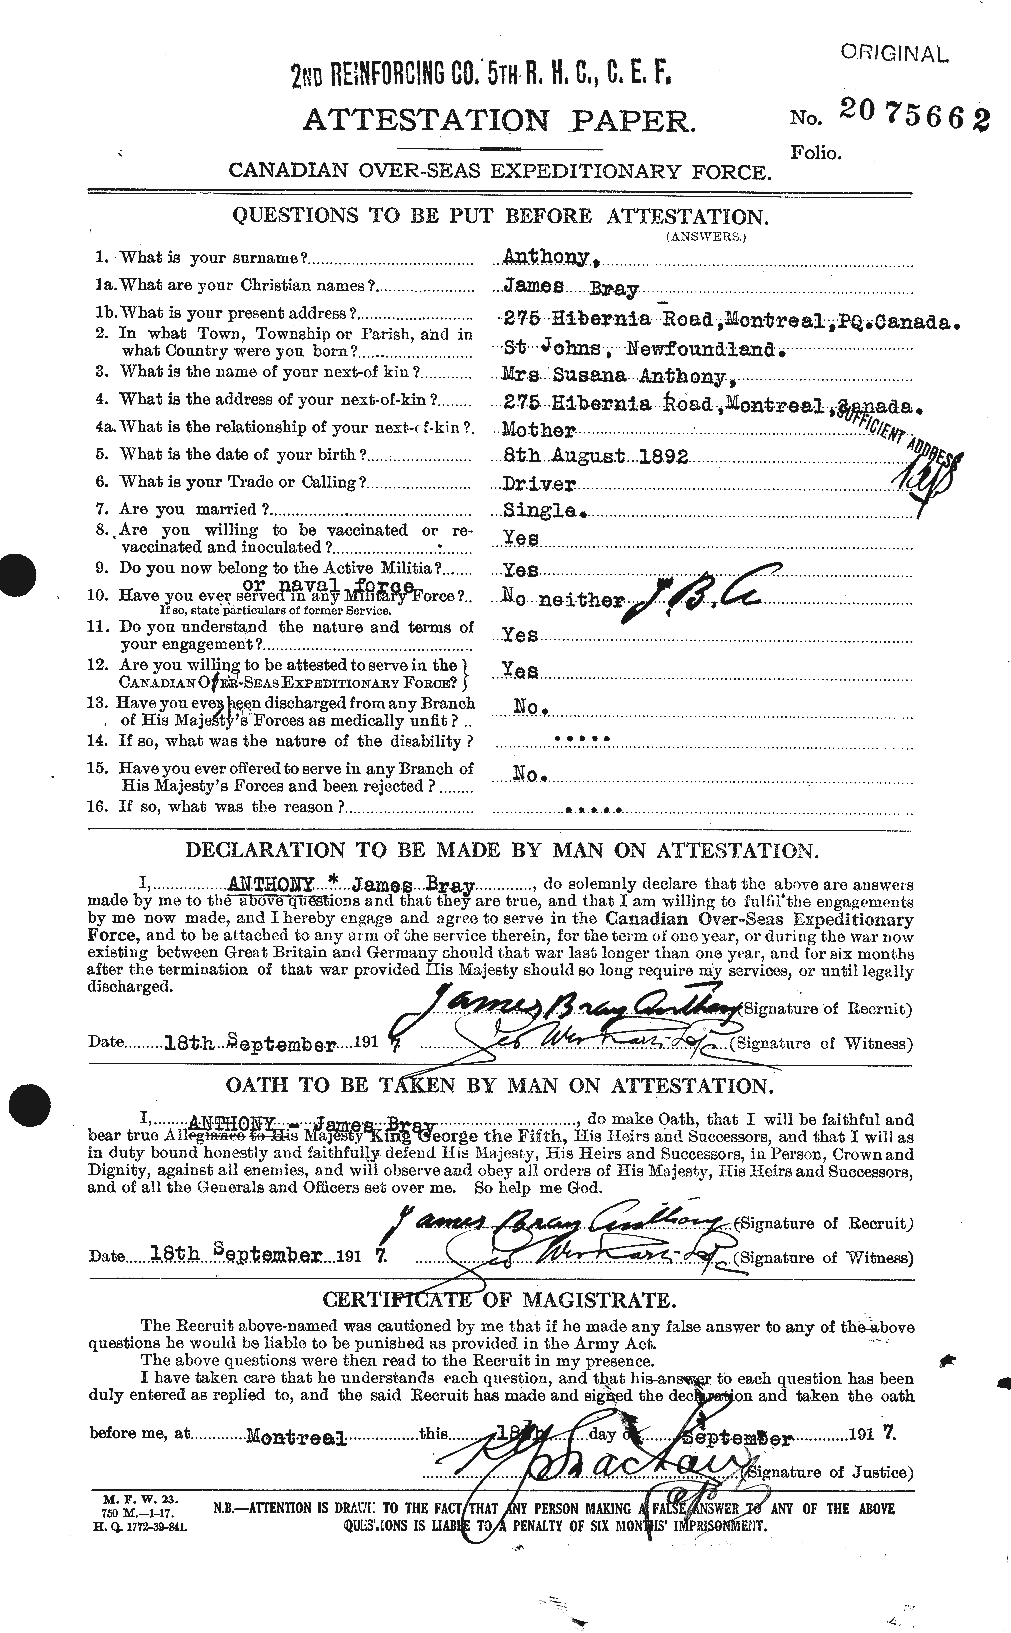 Personnel Records of the First World War - CEF 212198a